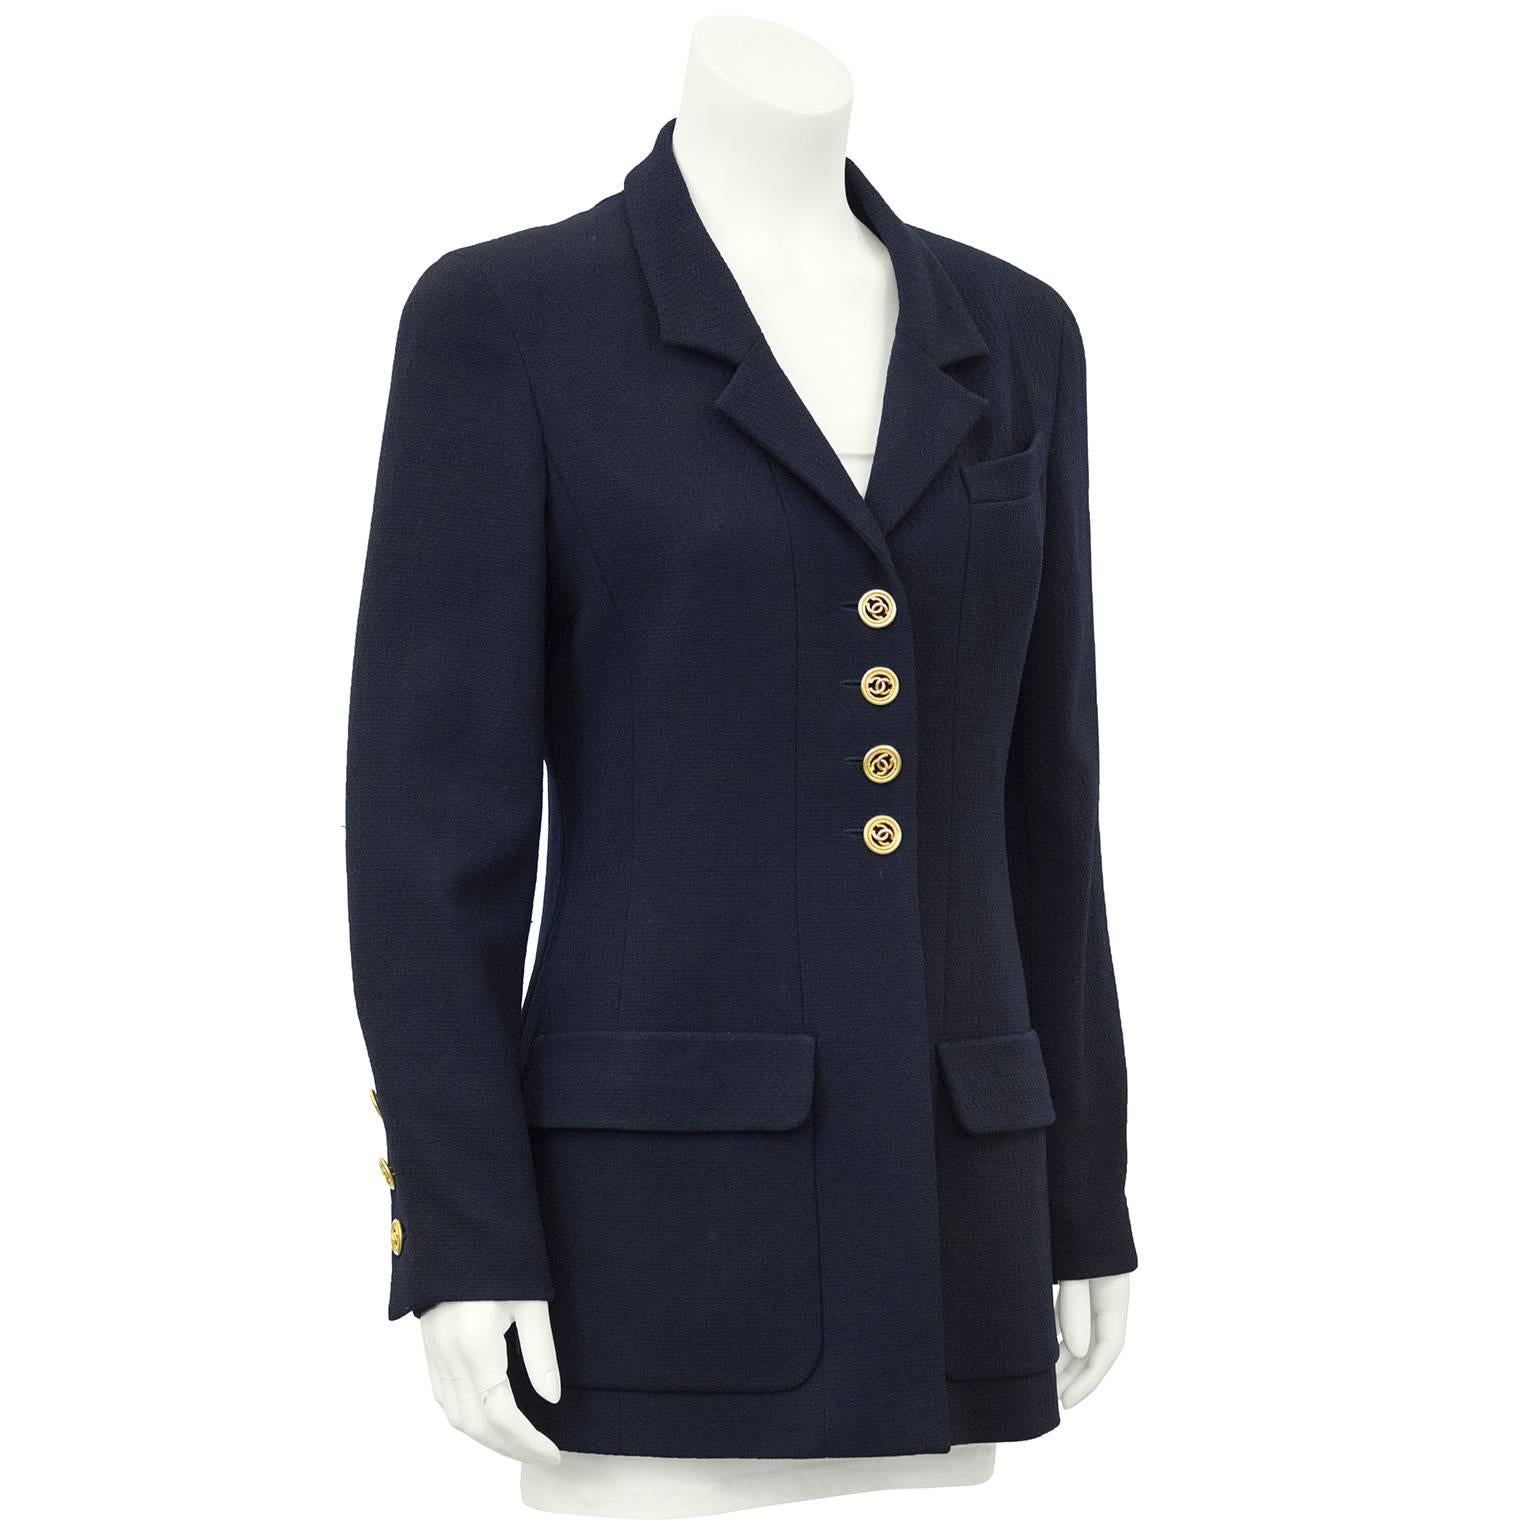 Classic 1990s Chanel navy blue wool blazer. Narrow collar, gold Chanel logo buttons at bust and cuffs and oversized patch pockets. Lined in black silk. Fits like a US 6. Excellent vintage condition.

Sleeve 22" Shoulder 20" Bust 36"